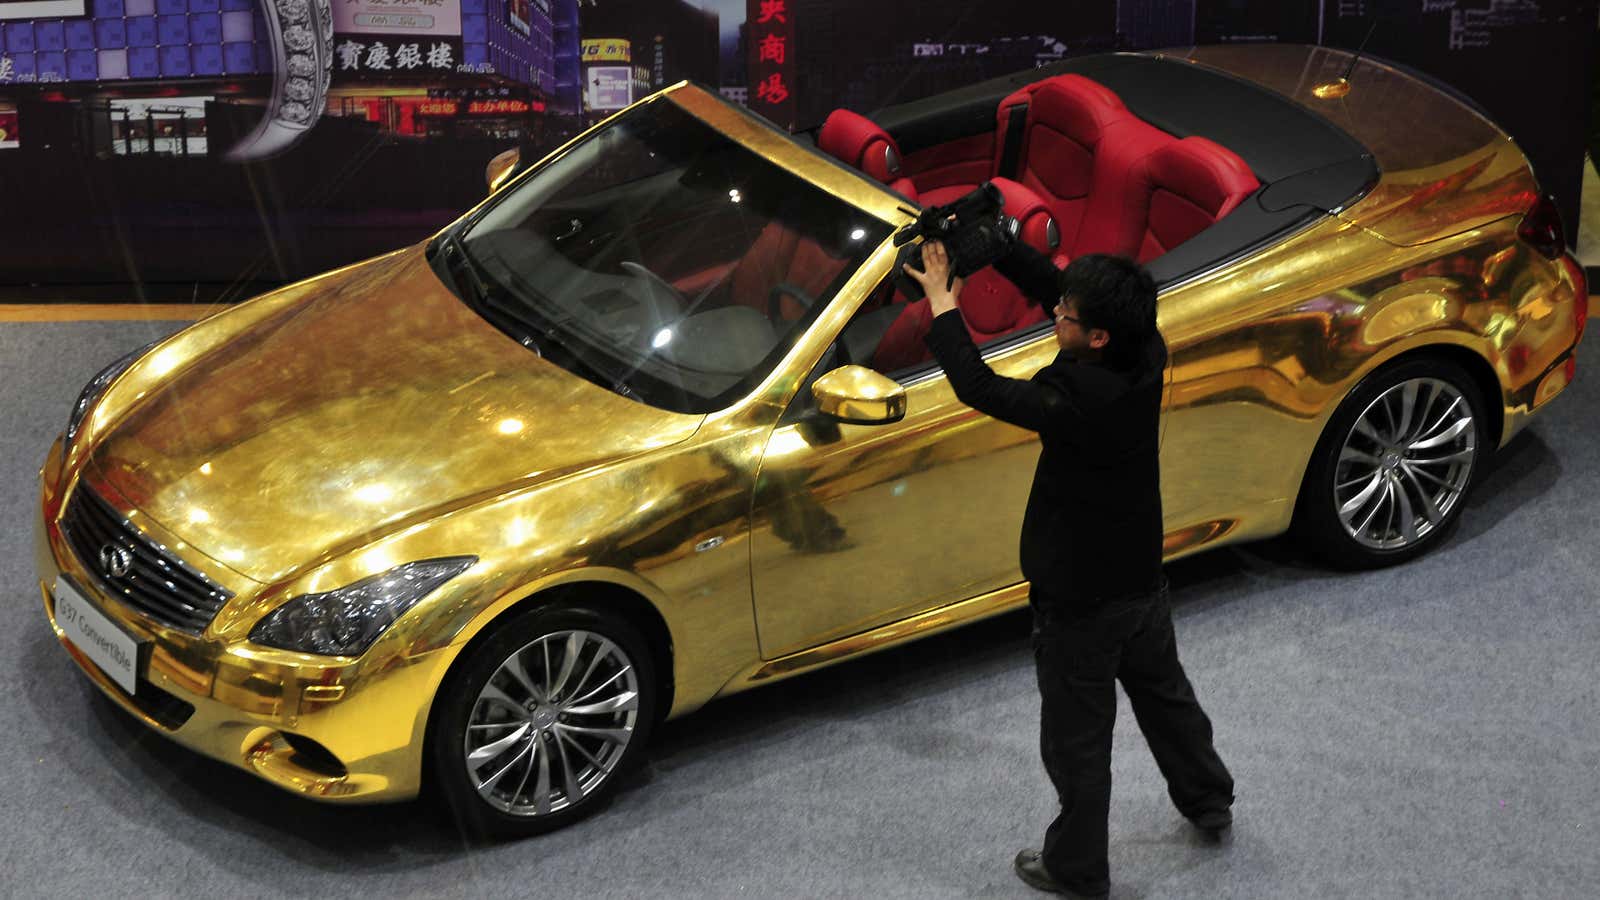 It takes grey income to buy a gold-plated Infiniti G37.